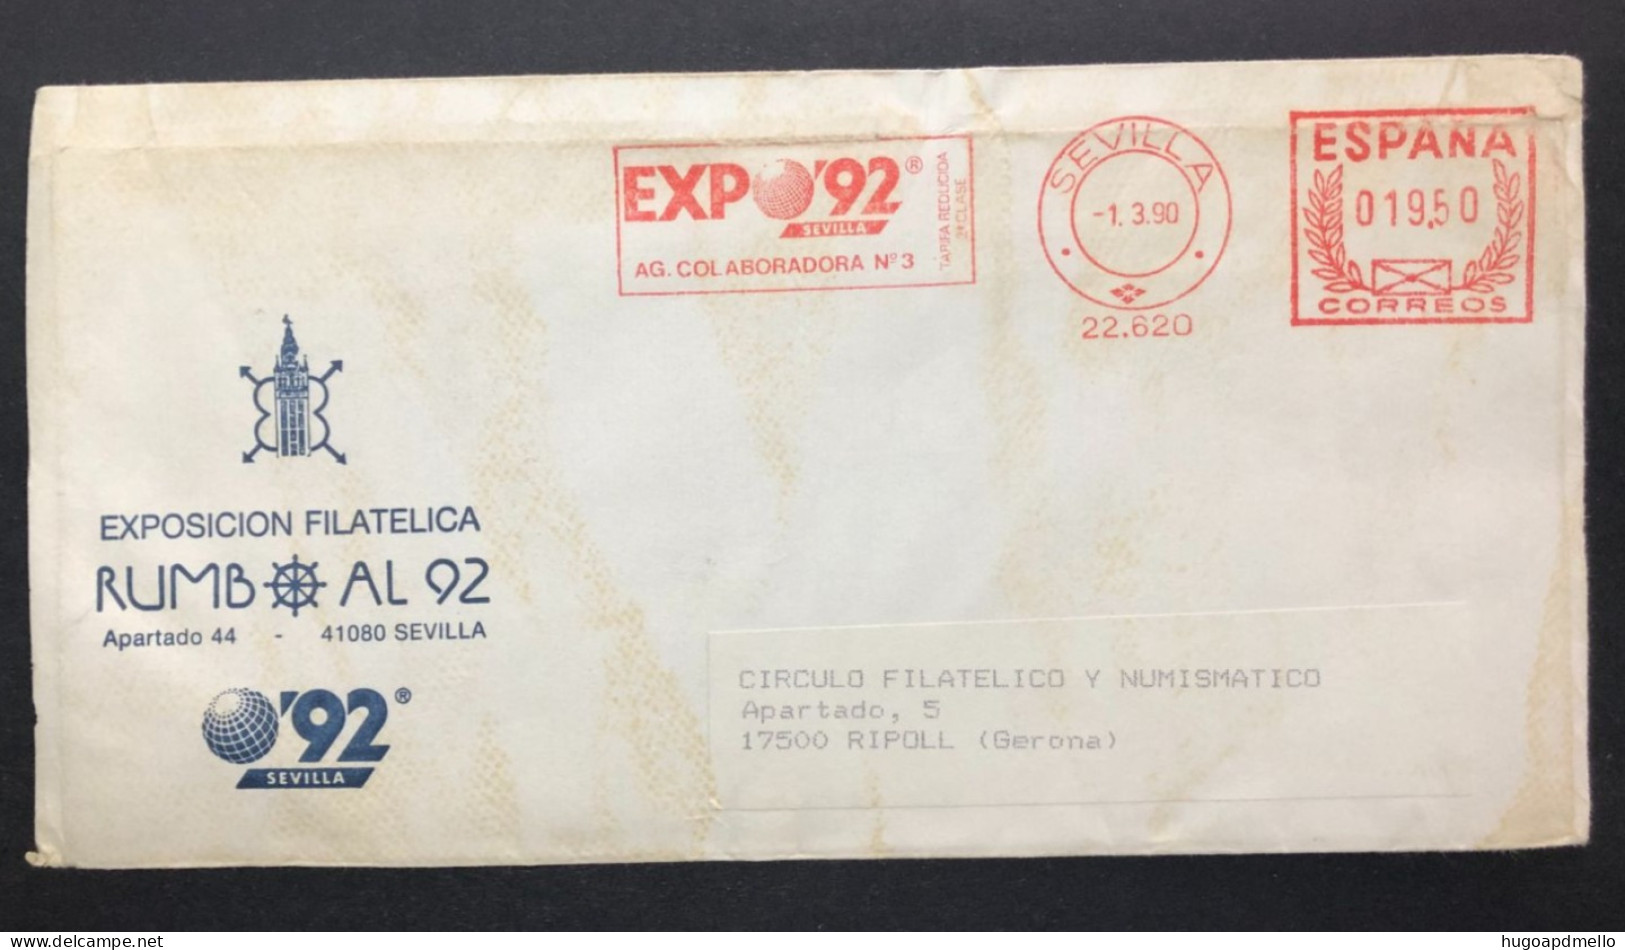 SPAIN, Cover With Special Cancellation « EXPO '92 », « SEVILLA Postmark », 1990 - 1992 – Séville (Espagne)